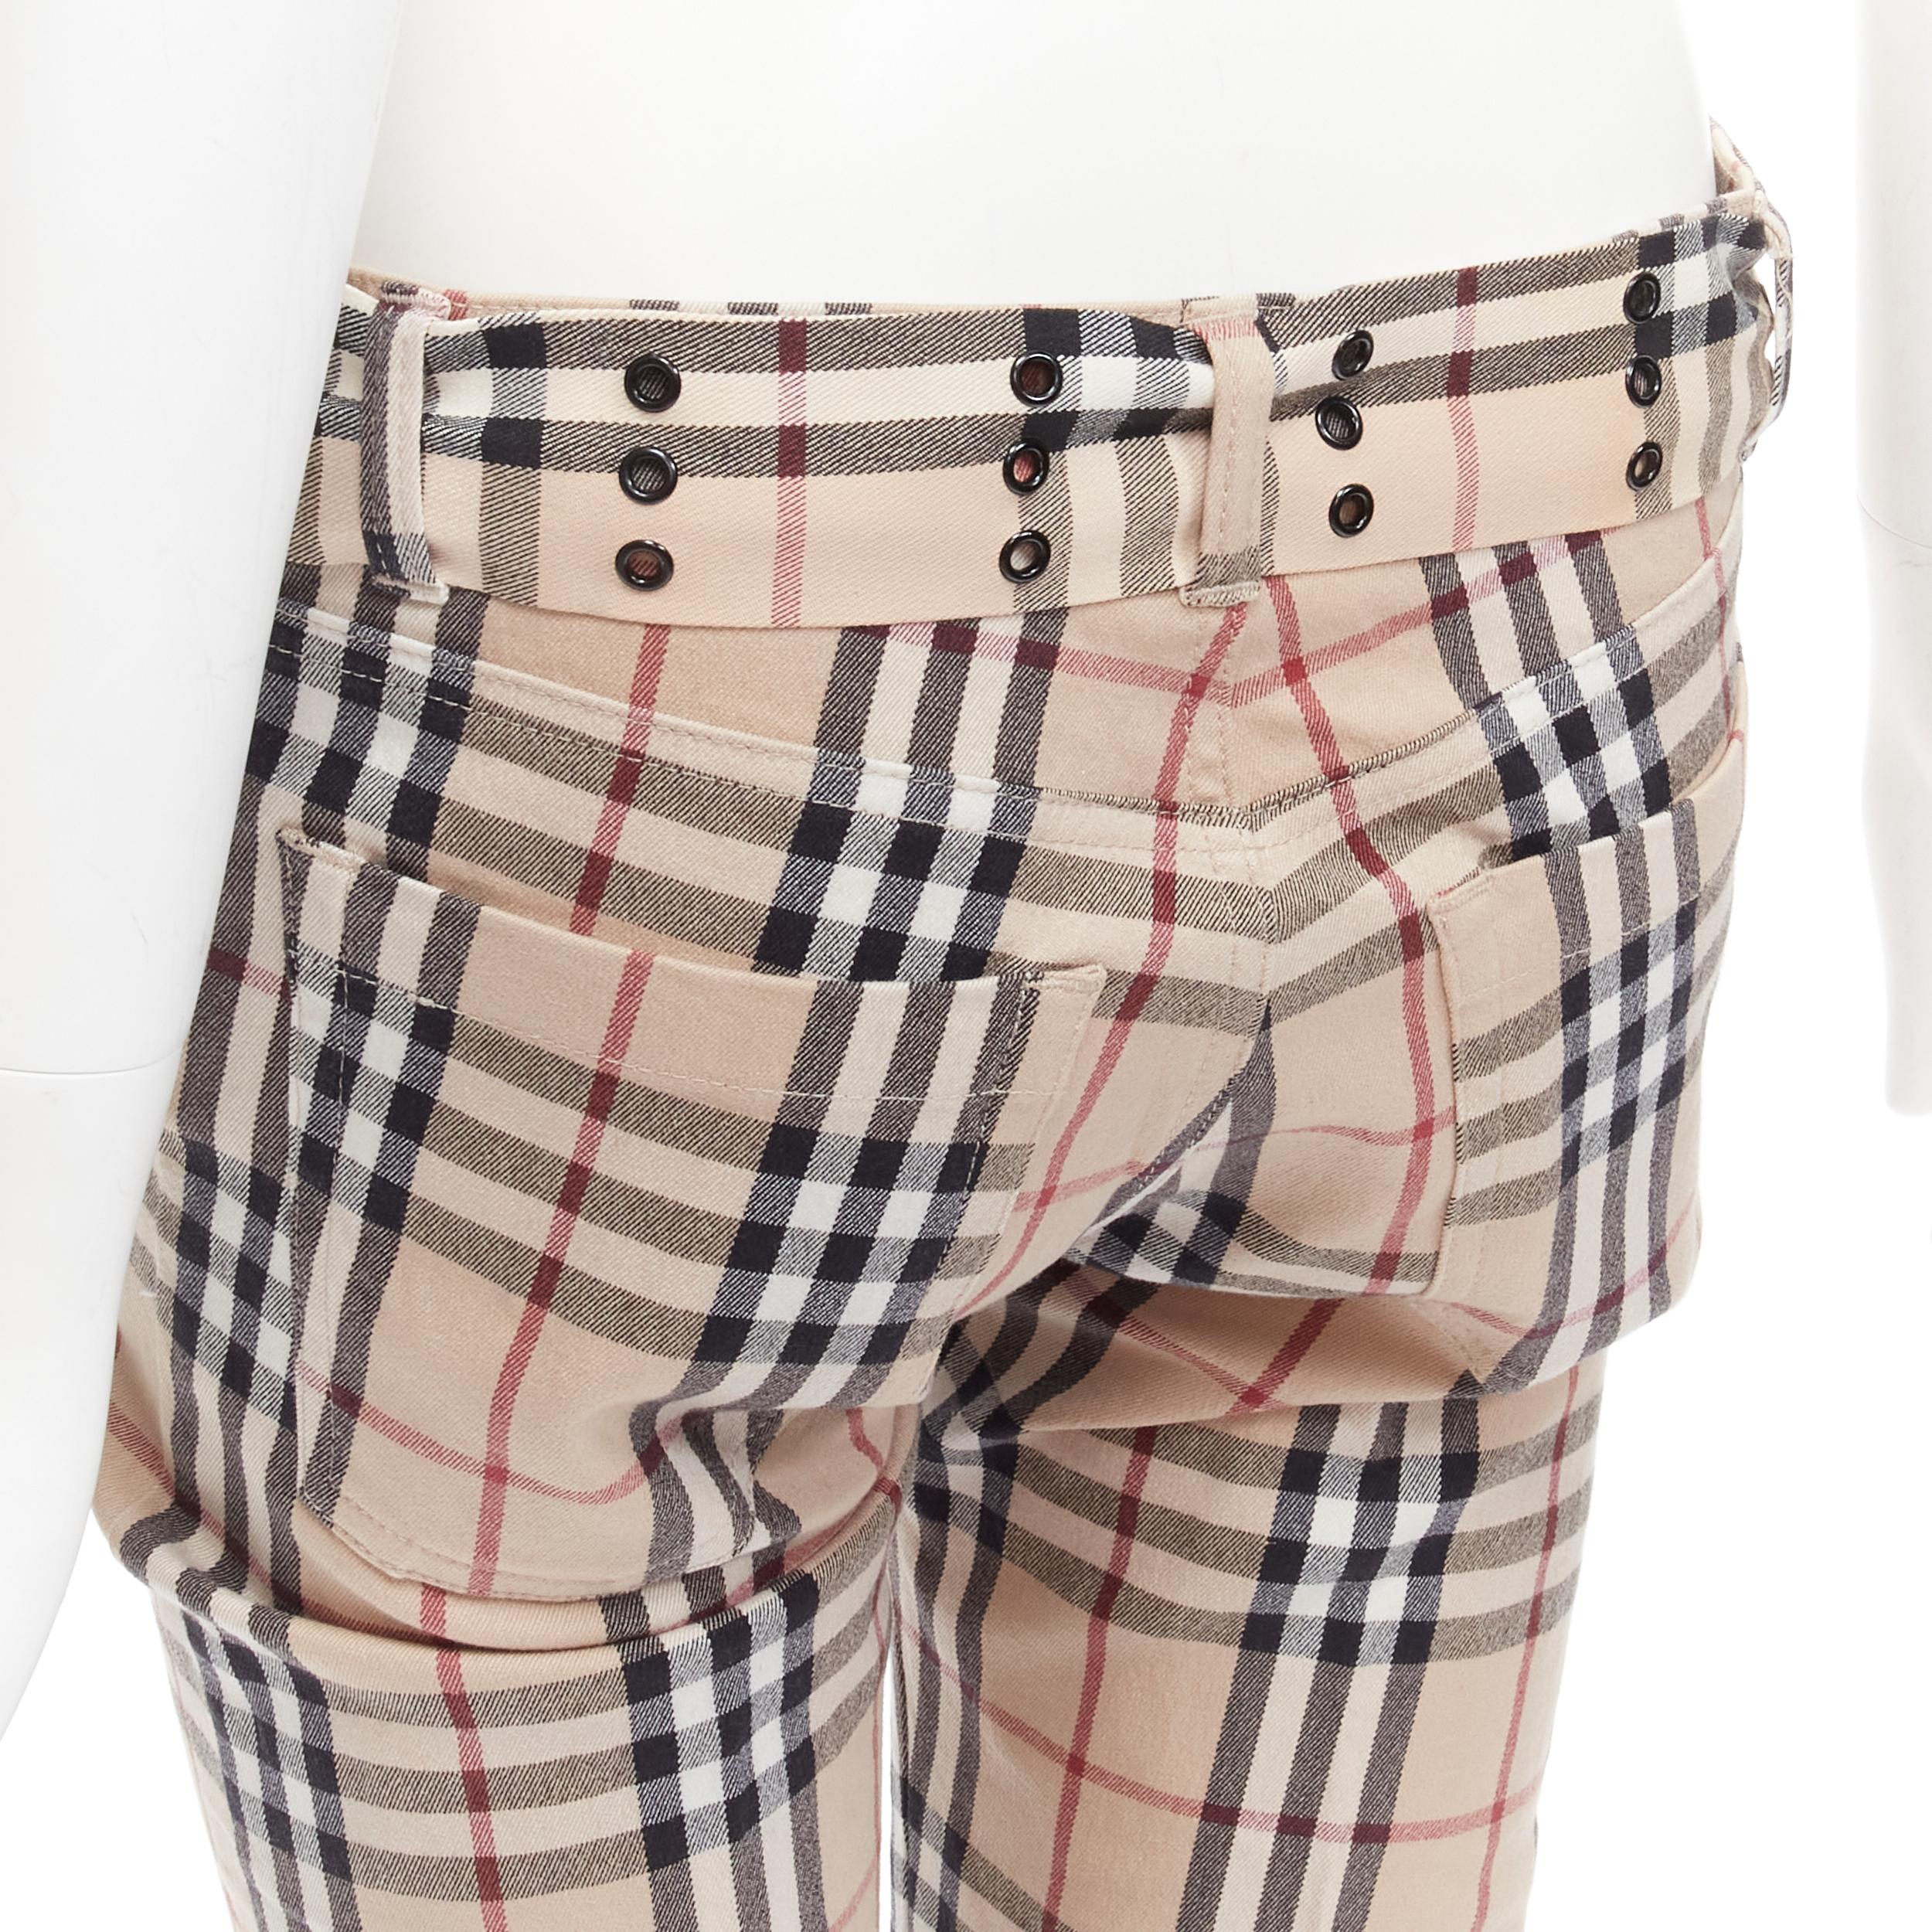 BURBERRY LONDON House Check Signature brown belted cropped pants UK6 US4 S
Brand: Burberry
Extra Detail: Hook eye grommet embellished belt. 4-pocket design. Cropped pants.

CONDITION:
Condition: Excellent, this item was pre-owned and is in excellent